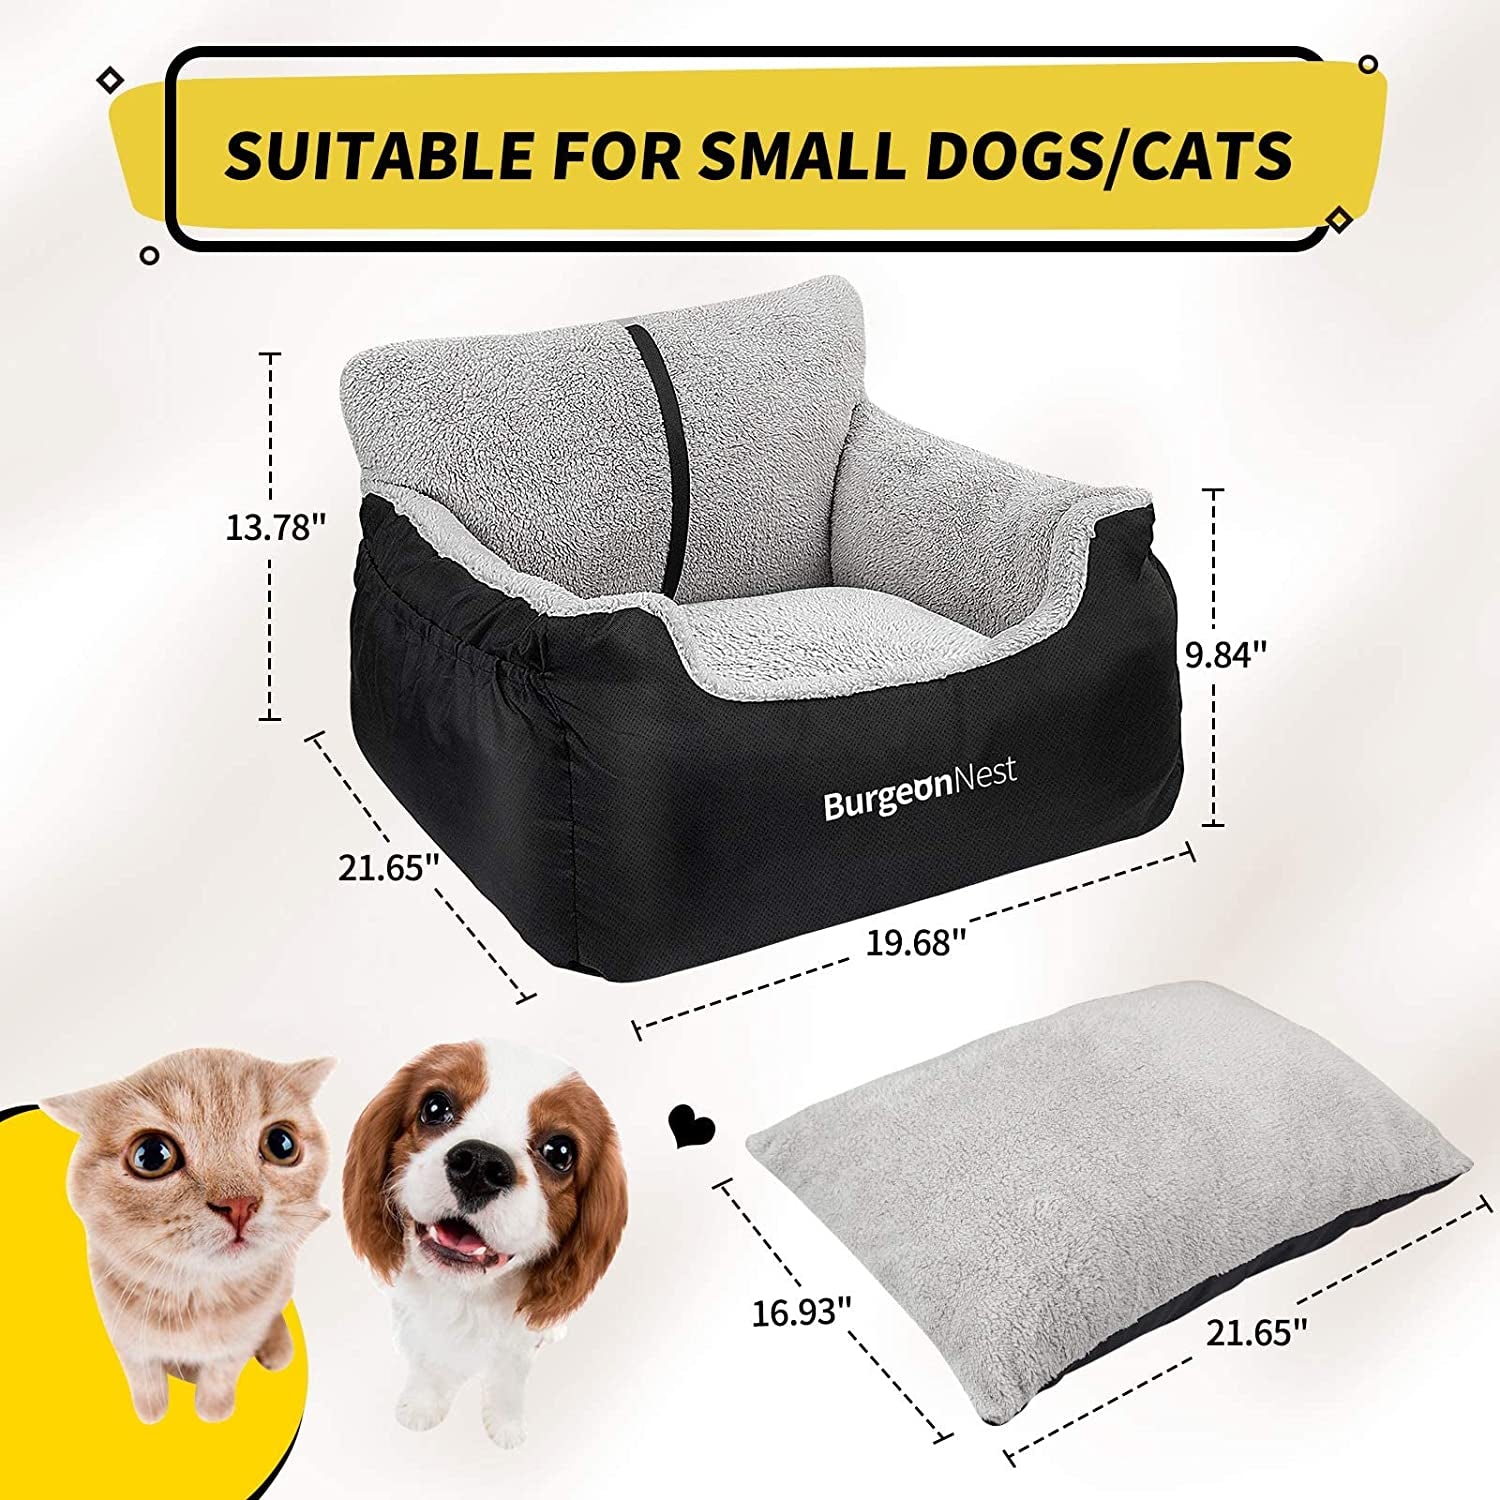 Fashion Dog Carrier For Small Dogs With Larg Pockets Holds Up To